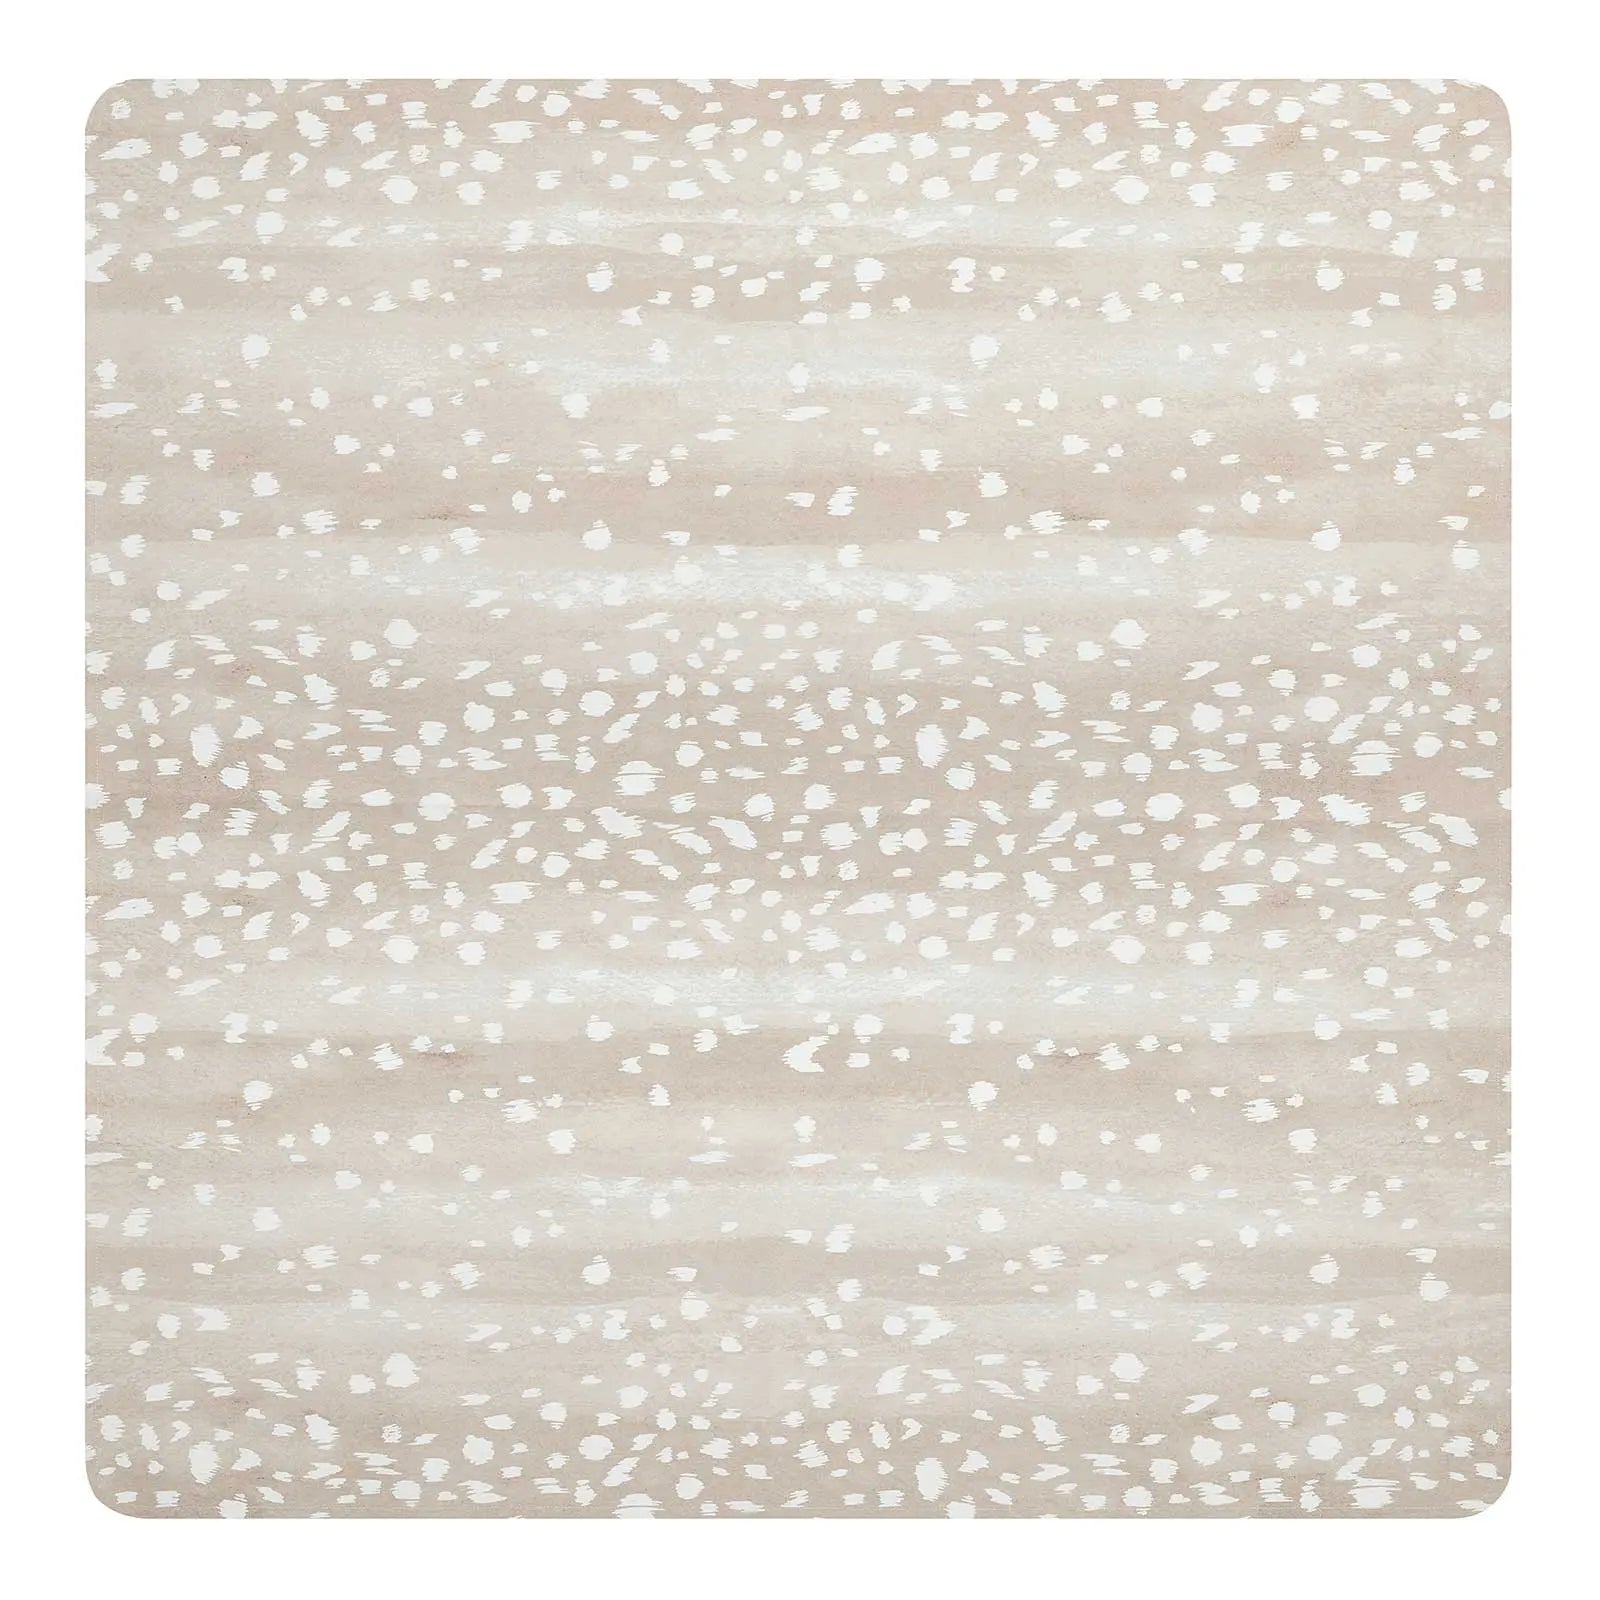 Fawn brown and white animal print high chair mat